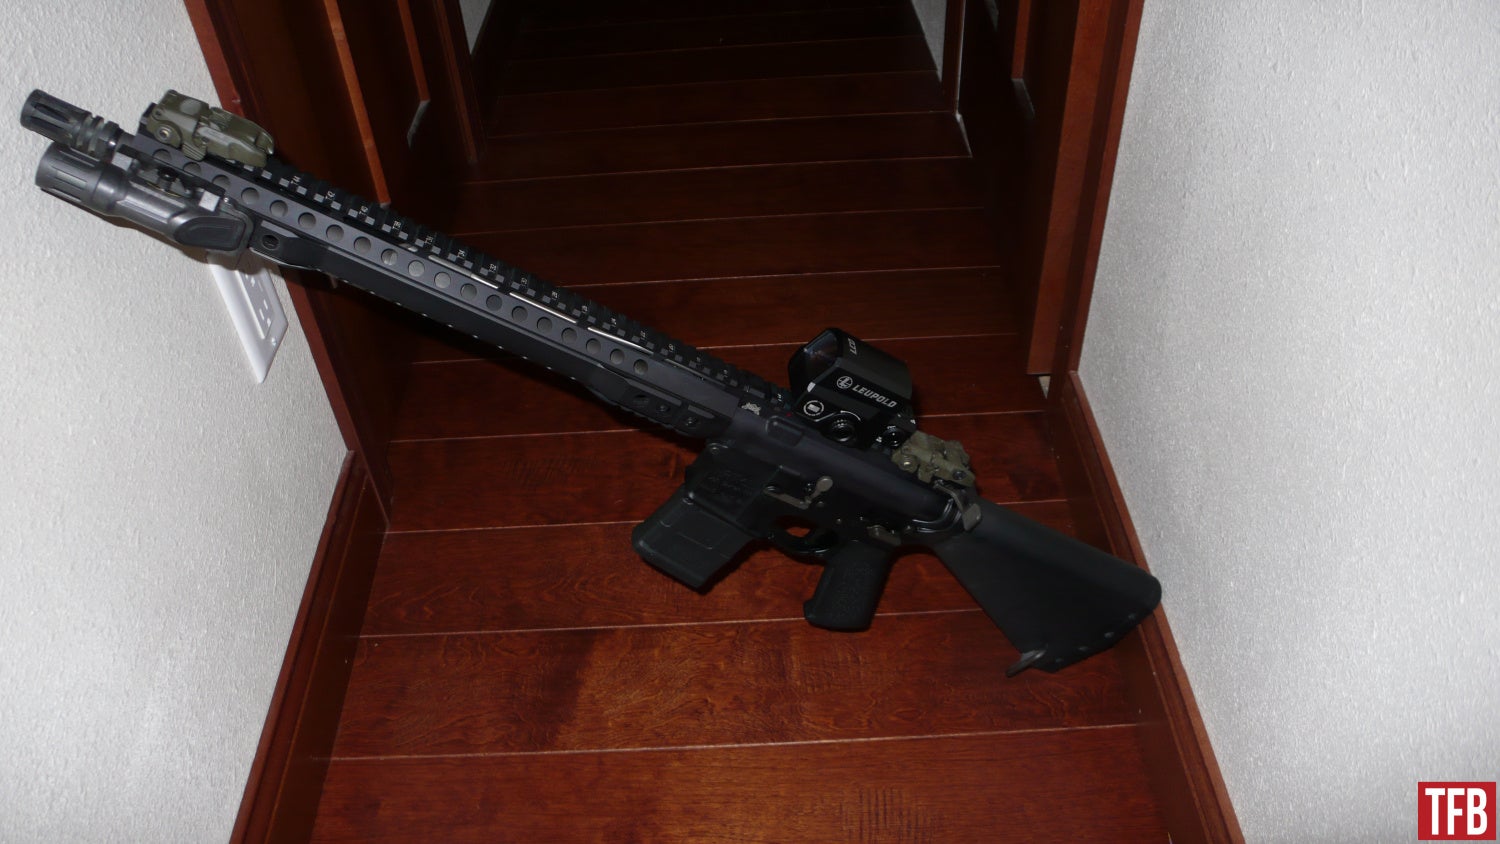 TFB DEBATE CLUB: The AR-15 For Home Defense - Point/Counterpoint